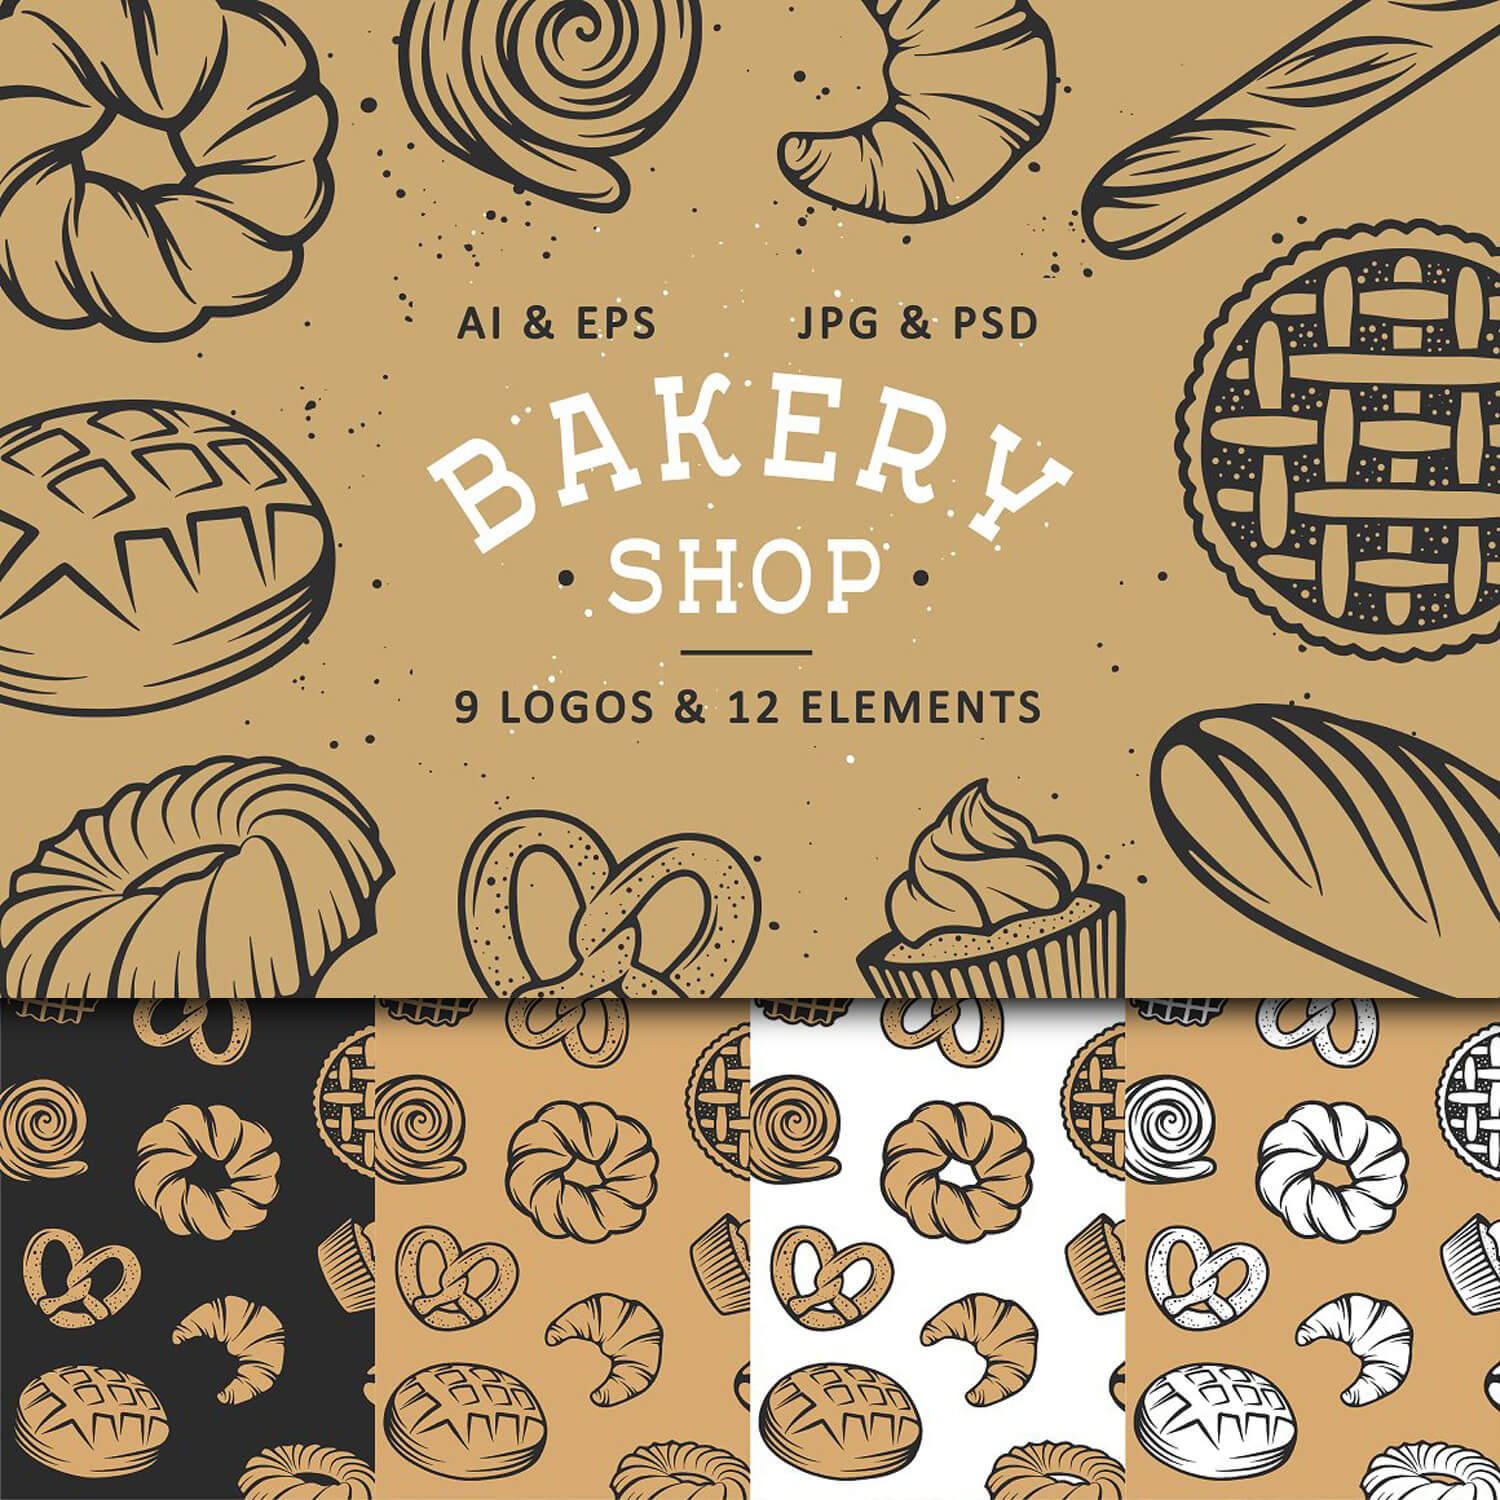 Set of bakery logos and elements.